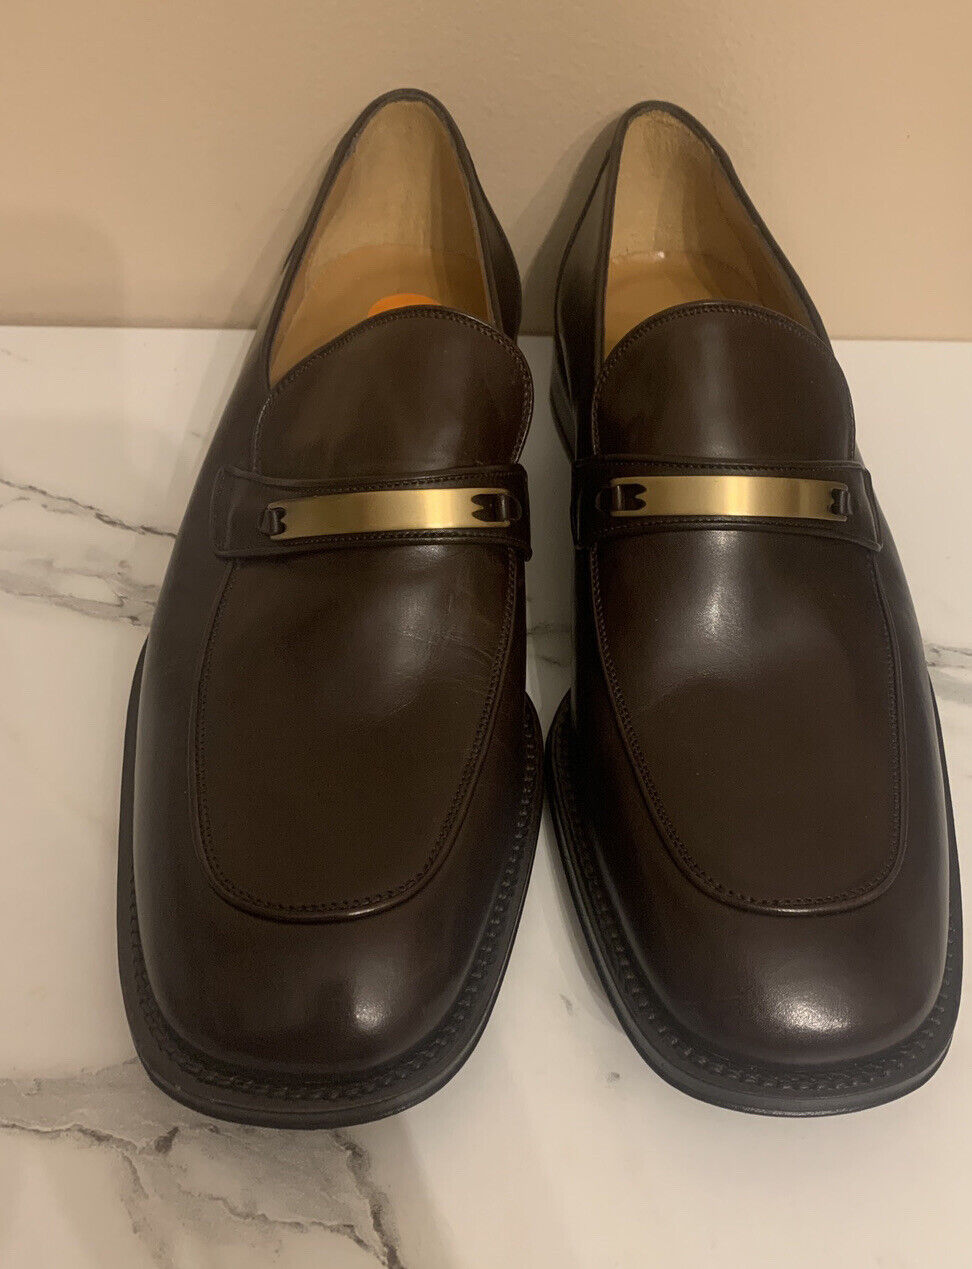 Bally Mens Orvieto Chocolate Leather Loafers Shoes US 8.5 New $295